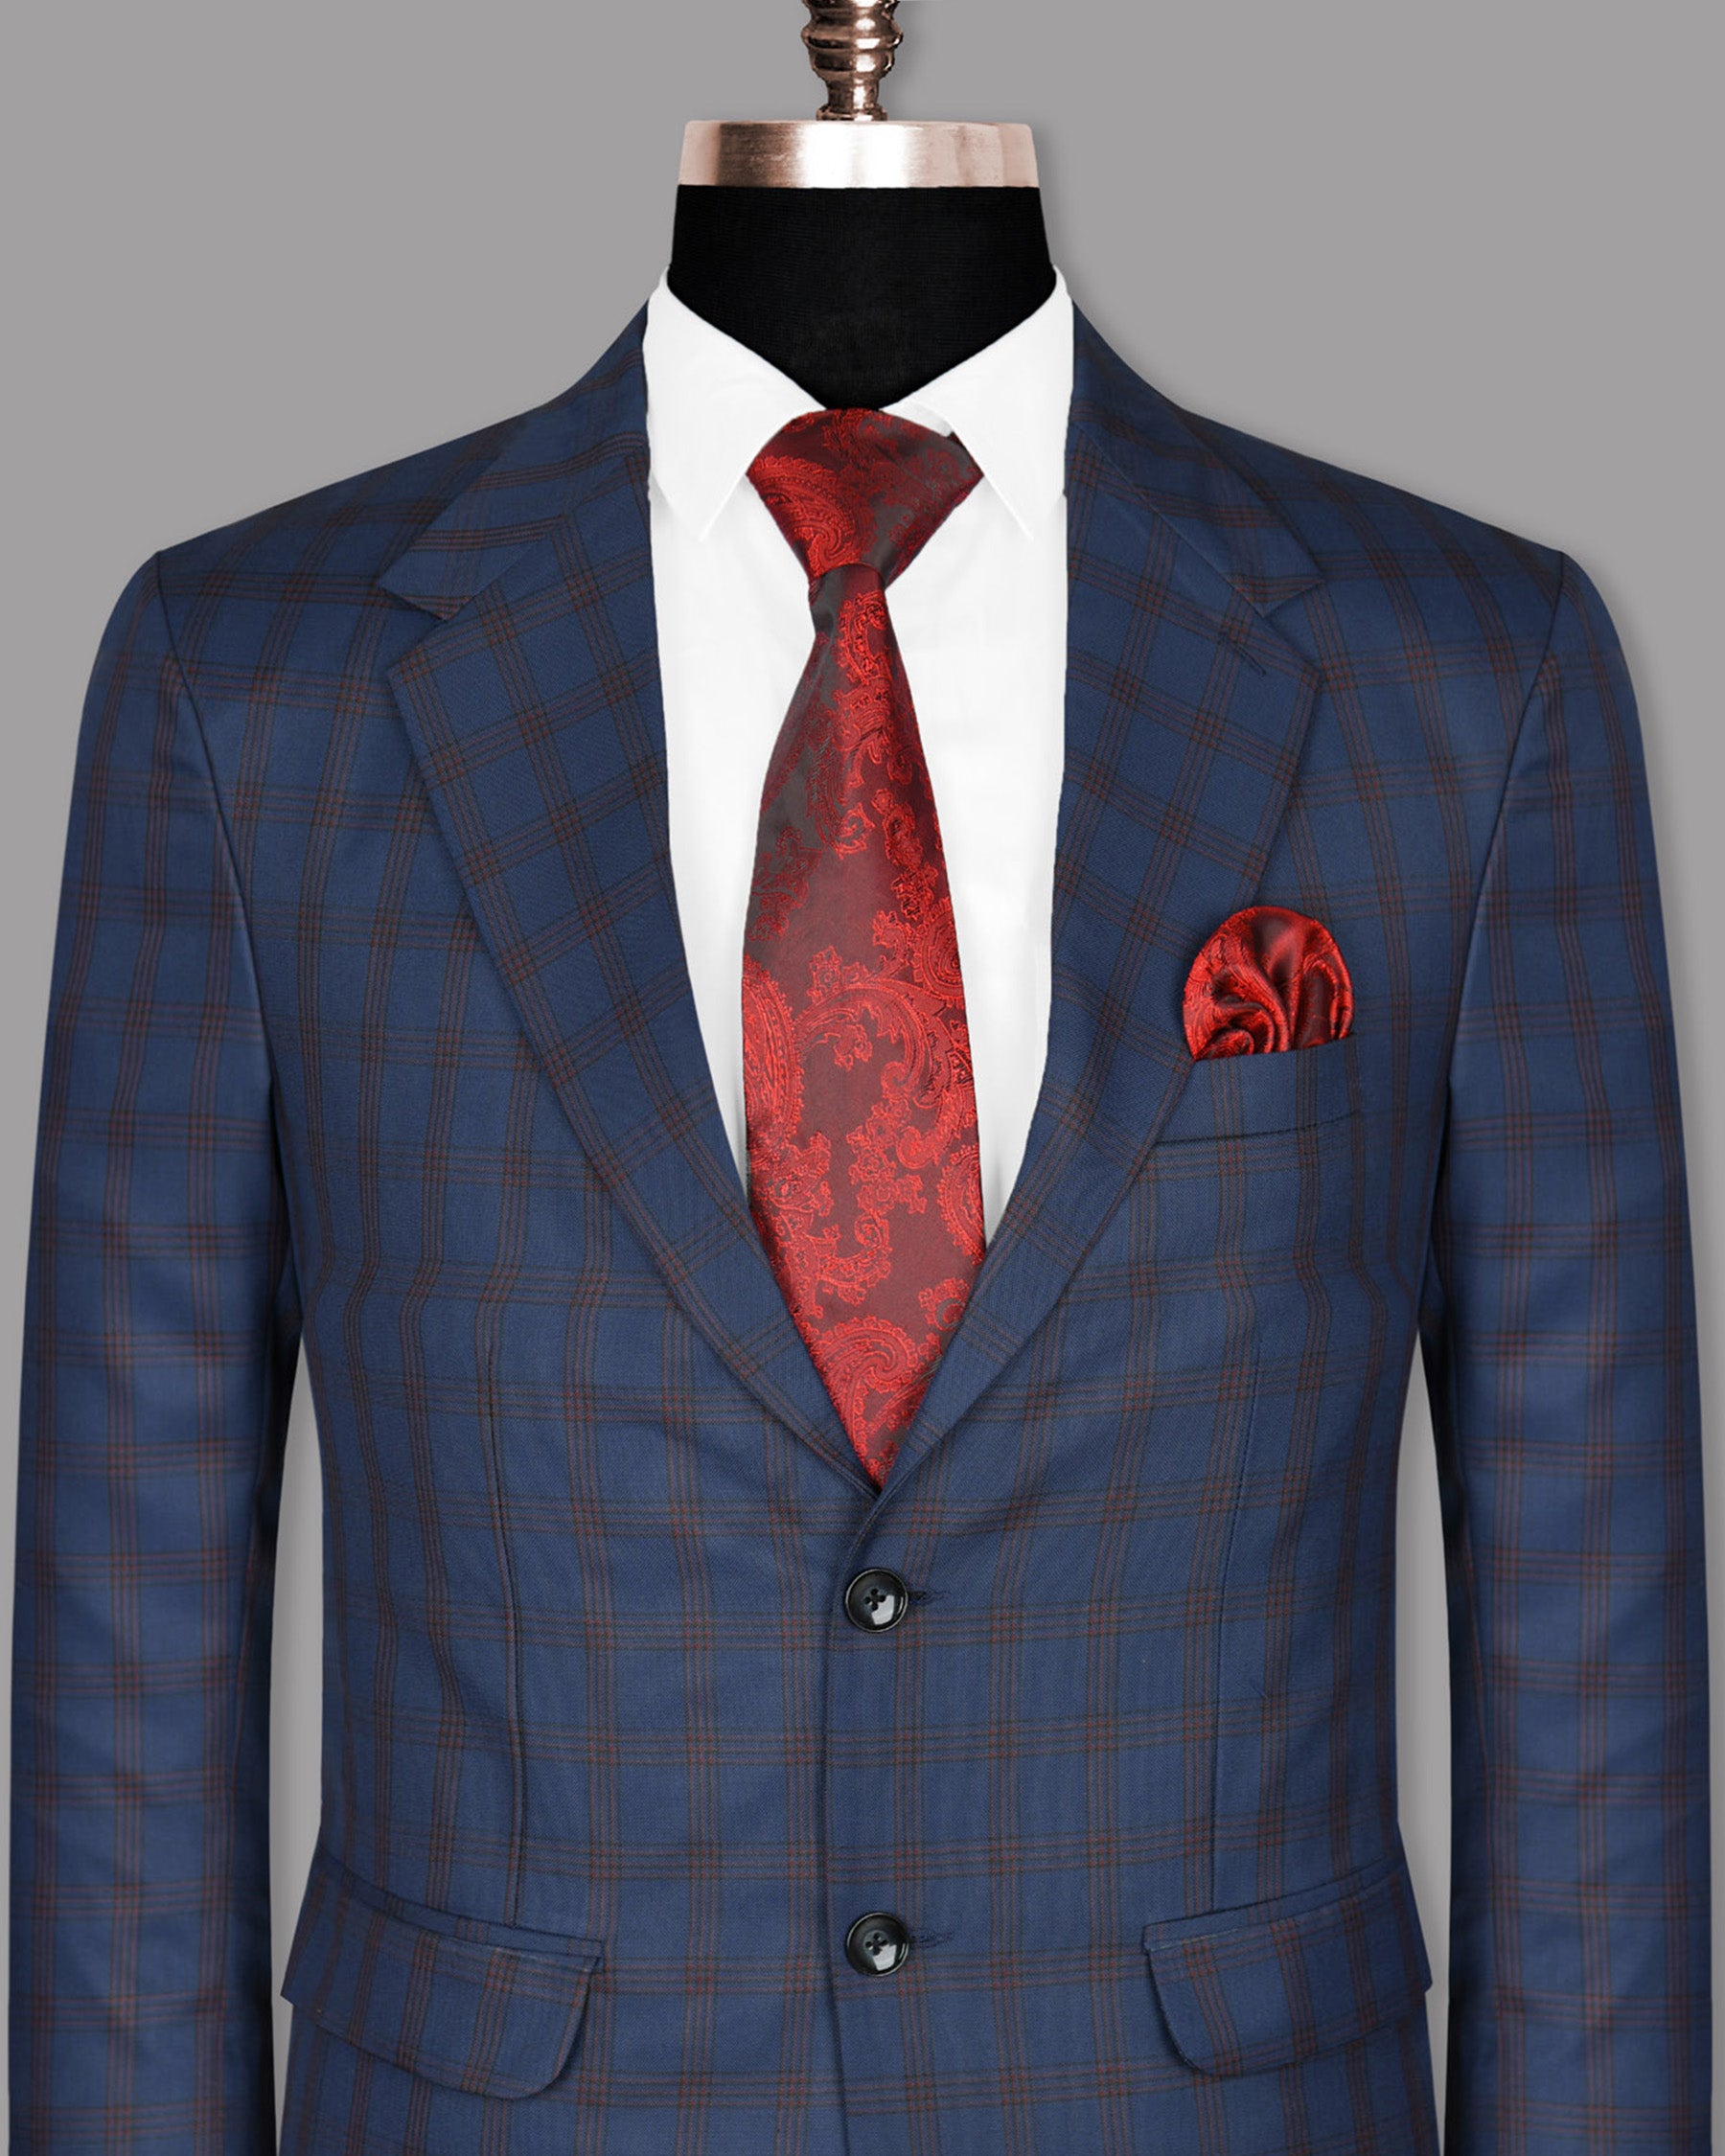 Space Blue with Russet Windowpane Premium Wool Rich Blazer BL926-SB-48, BL926-SB-50, BL926-SB-58, BL926-SB-60, BL926-SB-36, BL926-SB-38, BL926-SB-42, BL926-SB-44, BL926-SB-46, BL926-SB-54, BL926-SB-40, BL926-SB-52, BL926-SB-56